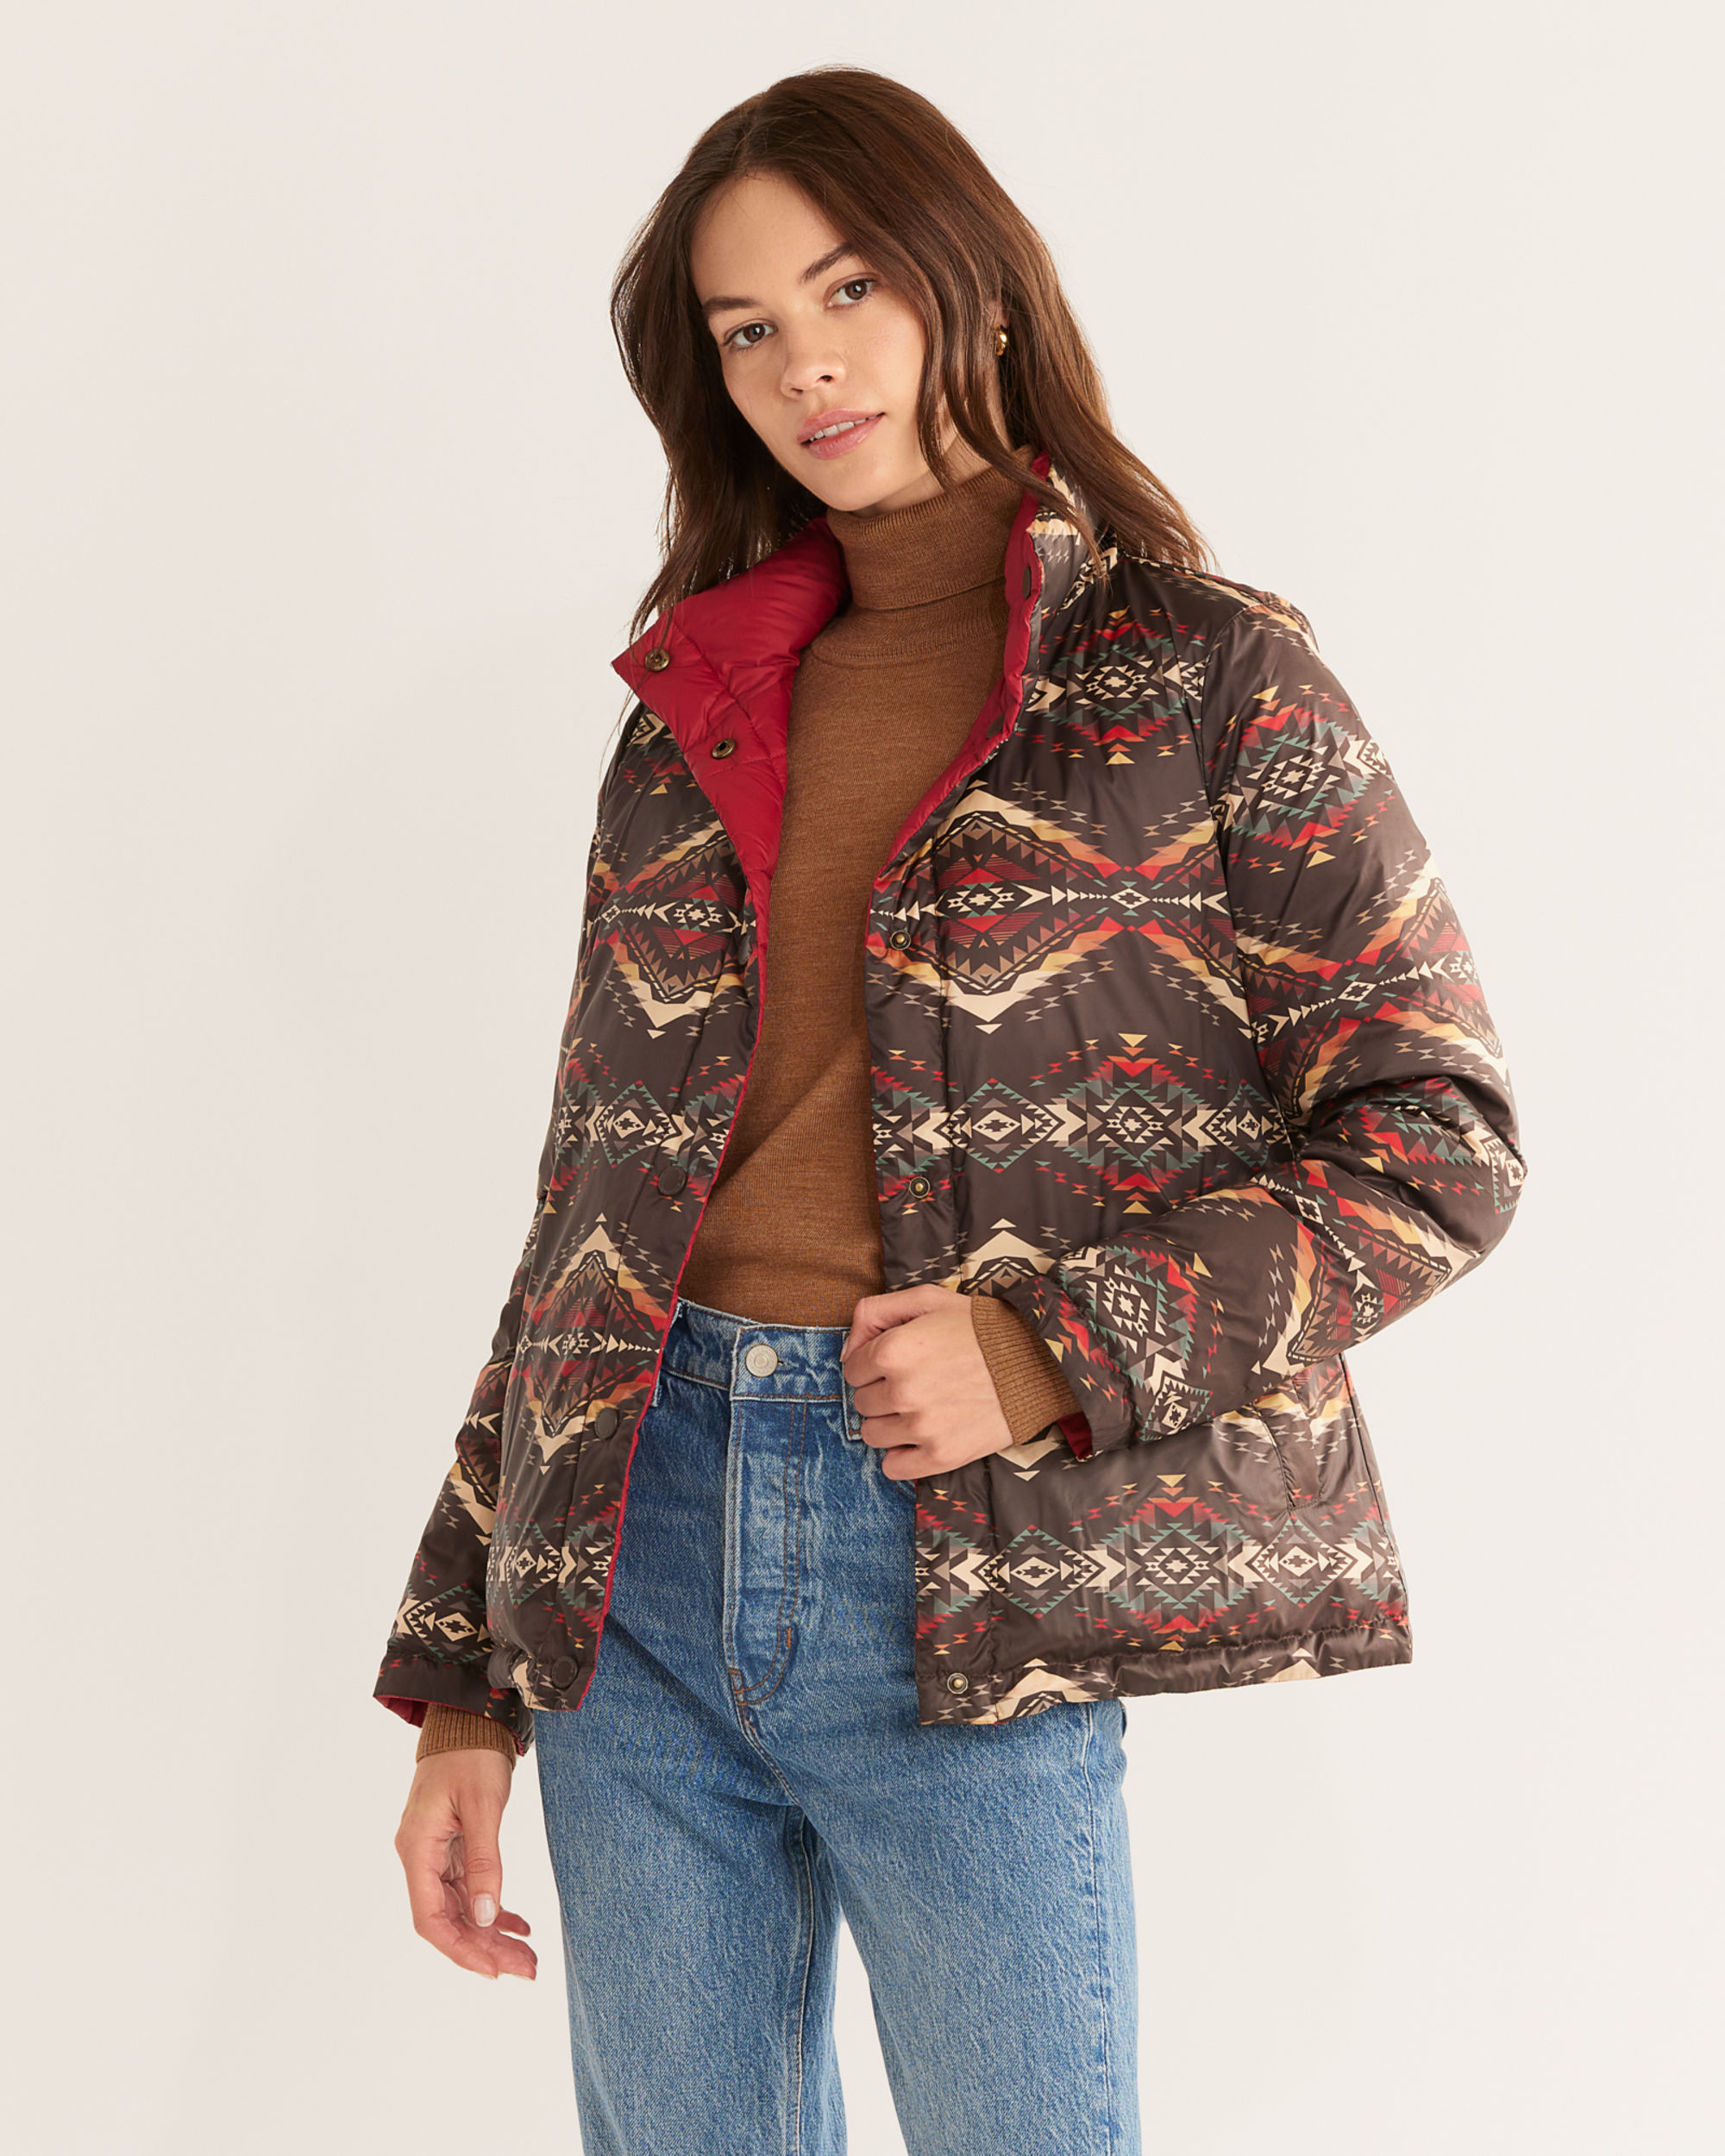 Stay Warm With Our Women\'s Packable Down Reversible Jacket | Pendleton